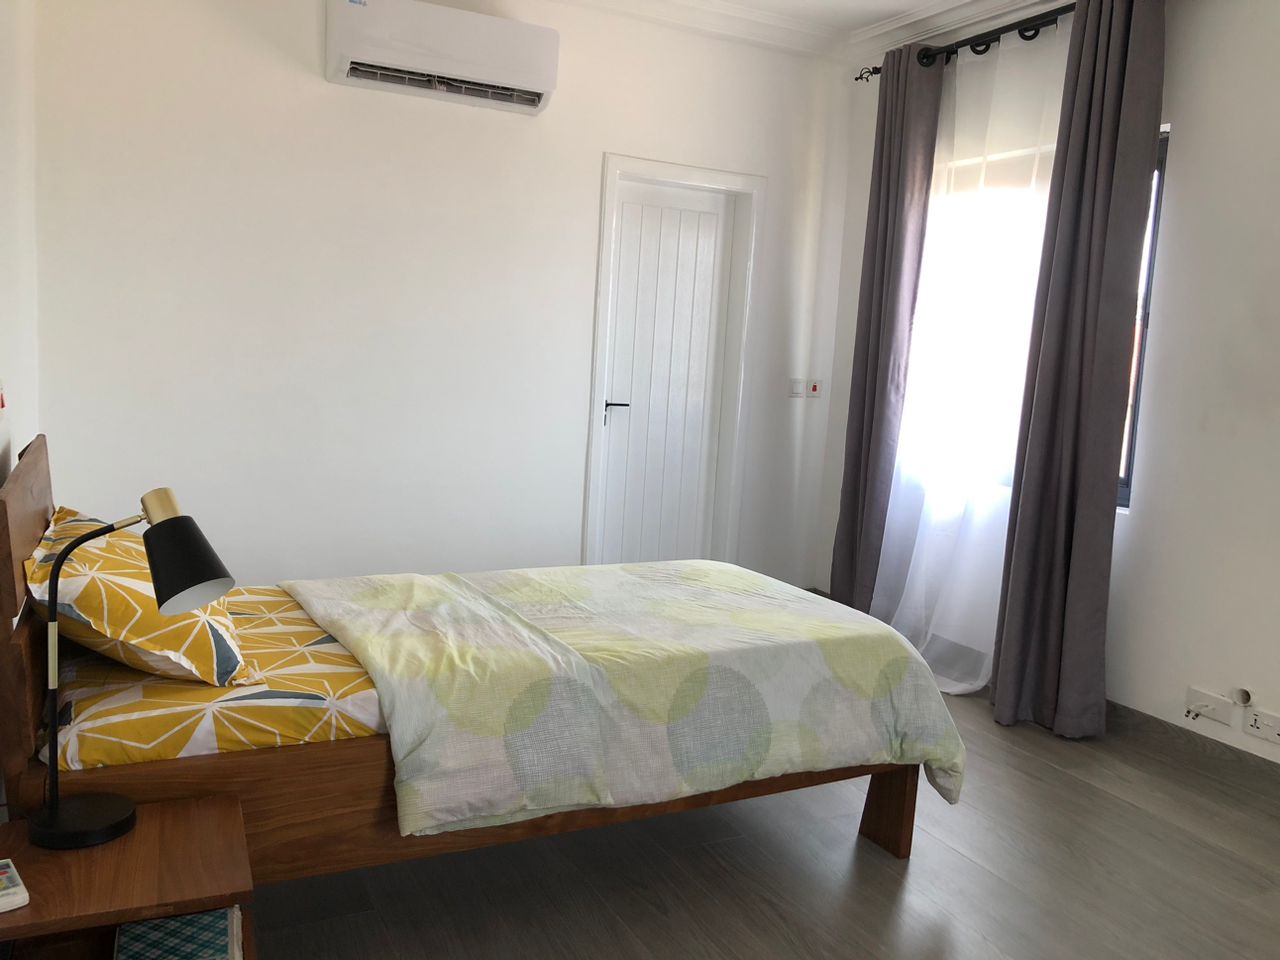 Three (3) Bedroom Furnished & Unfurnished Apartments for Rent at Tse Addo